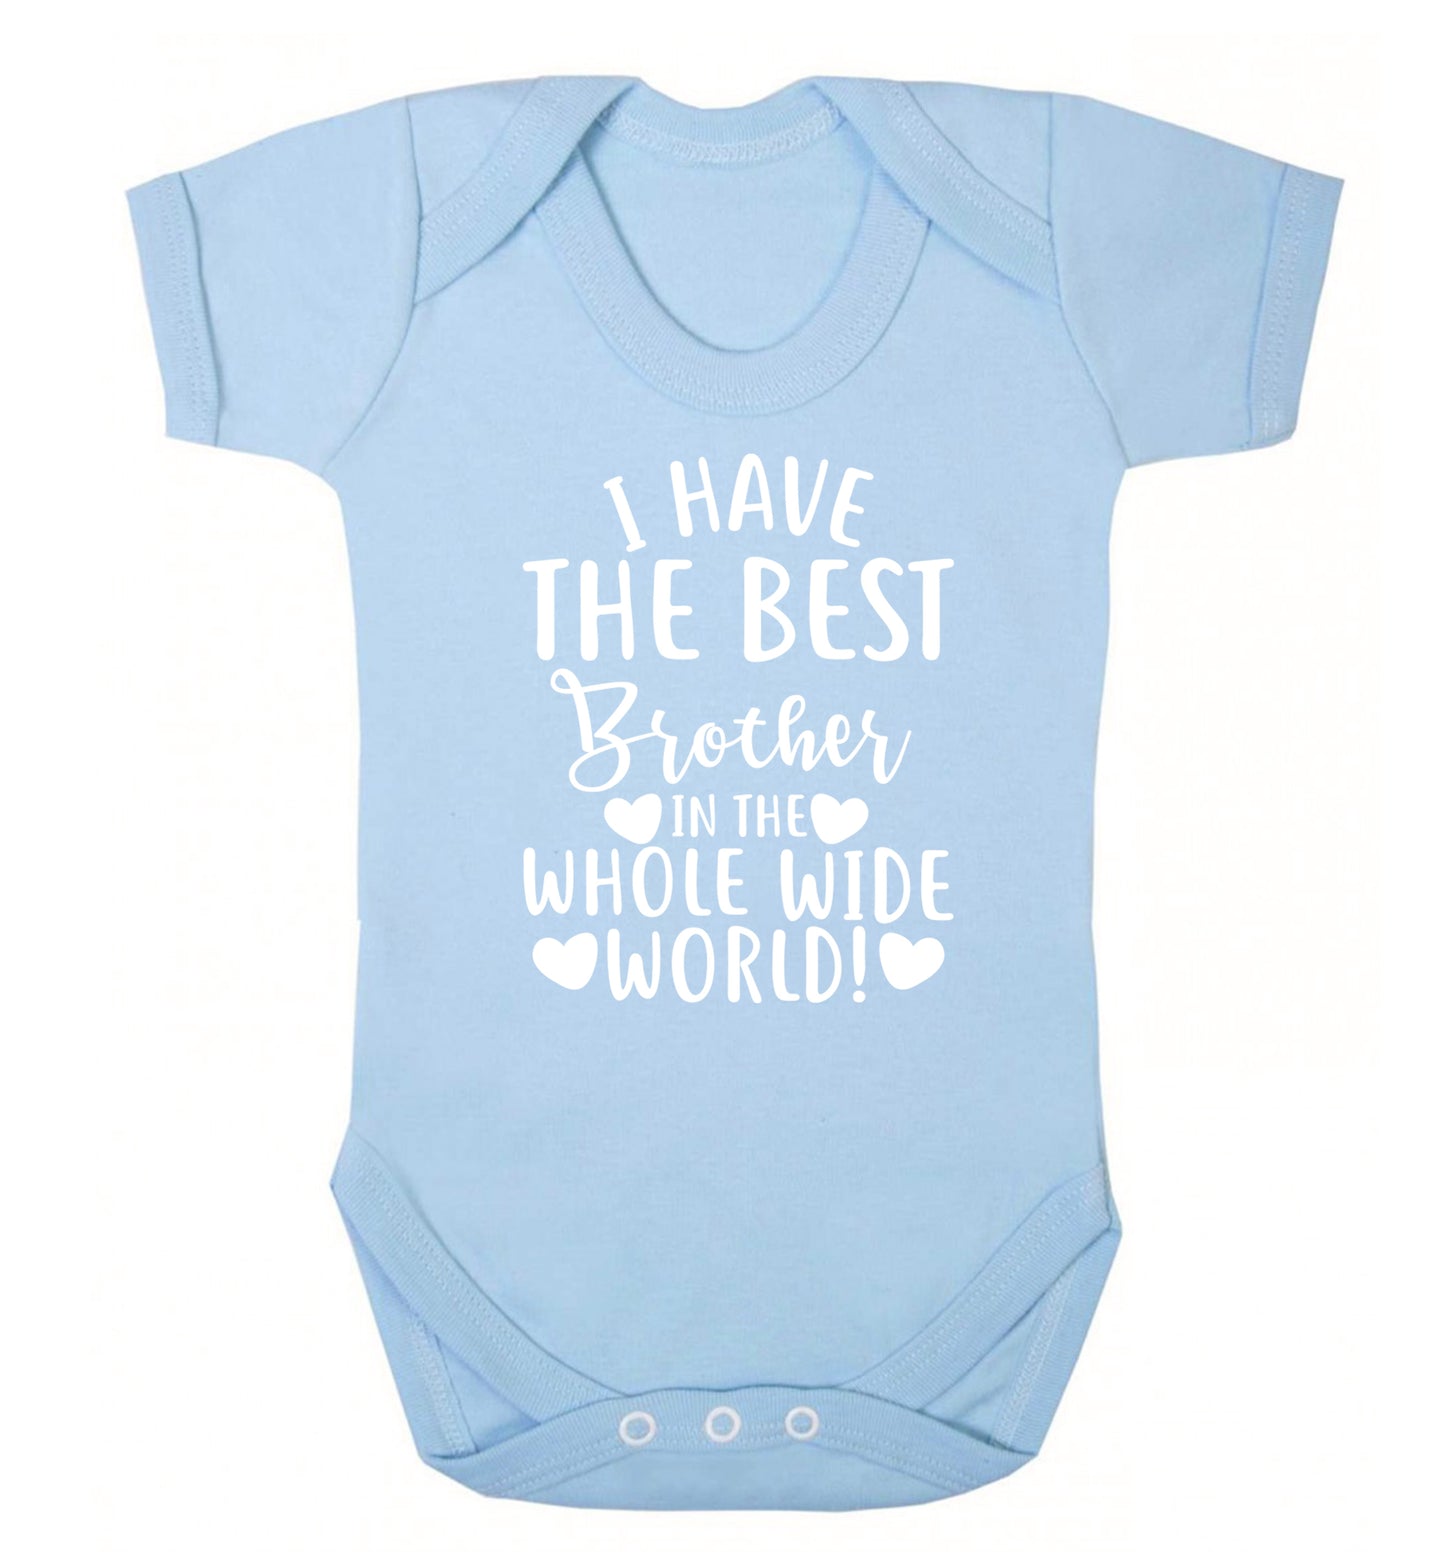 I have the best brother in the whole wide world! Baby Vest pale blue 18-24 months